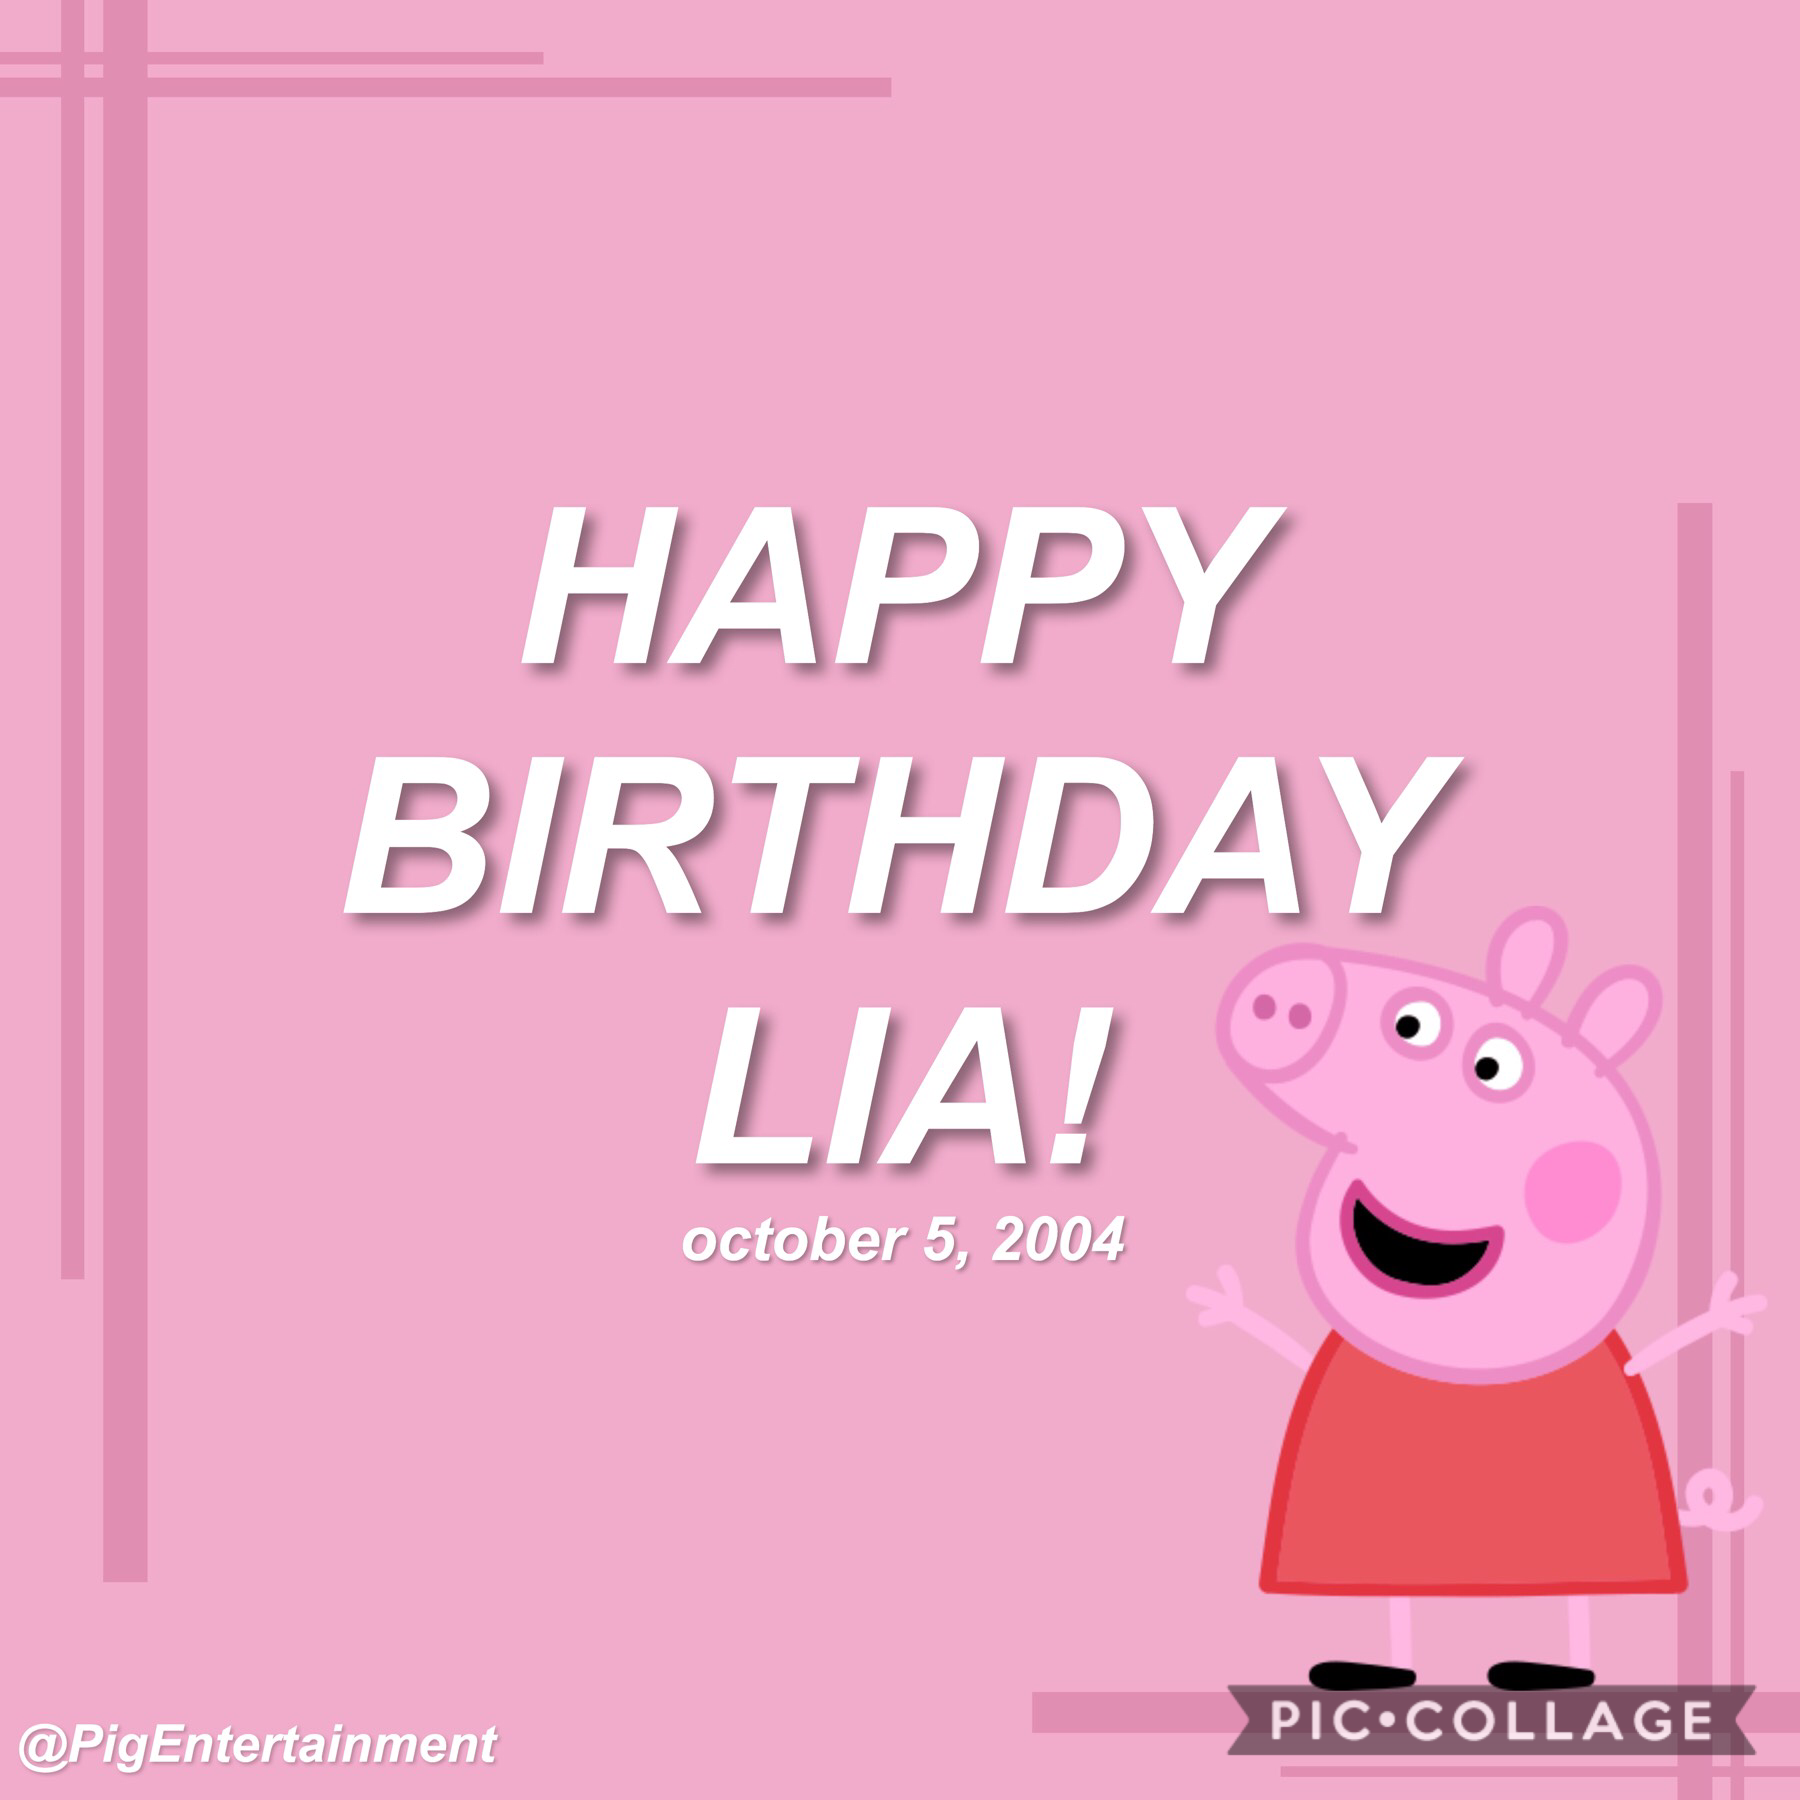 DJSJDJSJ HAPPY BIRTHDAY TO THE BEST MANAGER EVER!!!! (aka @milkysugar)
“happy birthday Lia, thank you for being the best manager ever” - BlackOink members

*snort*

🐷🐷

~mei